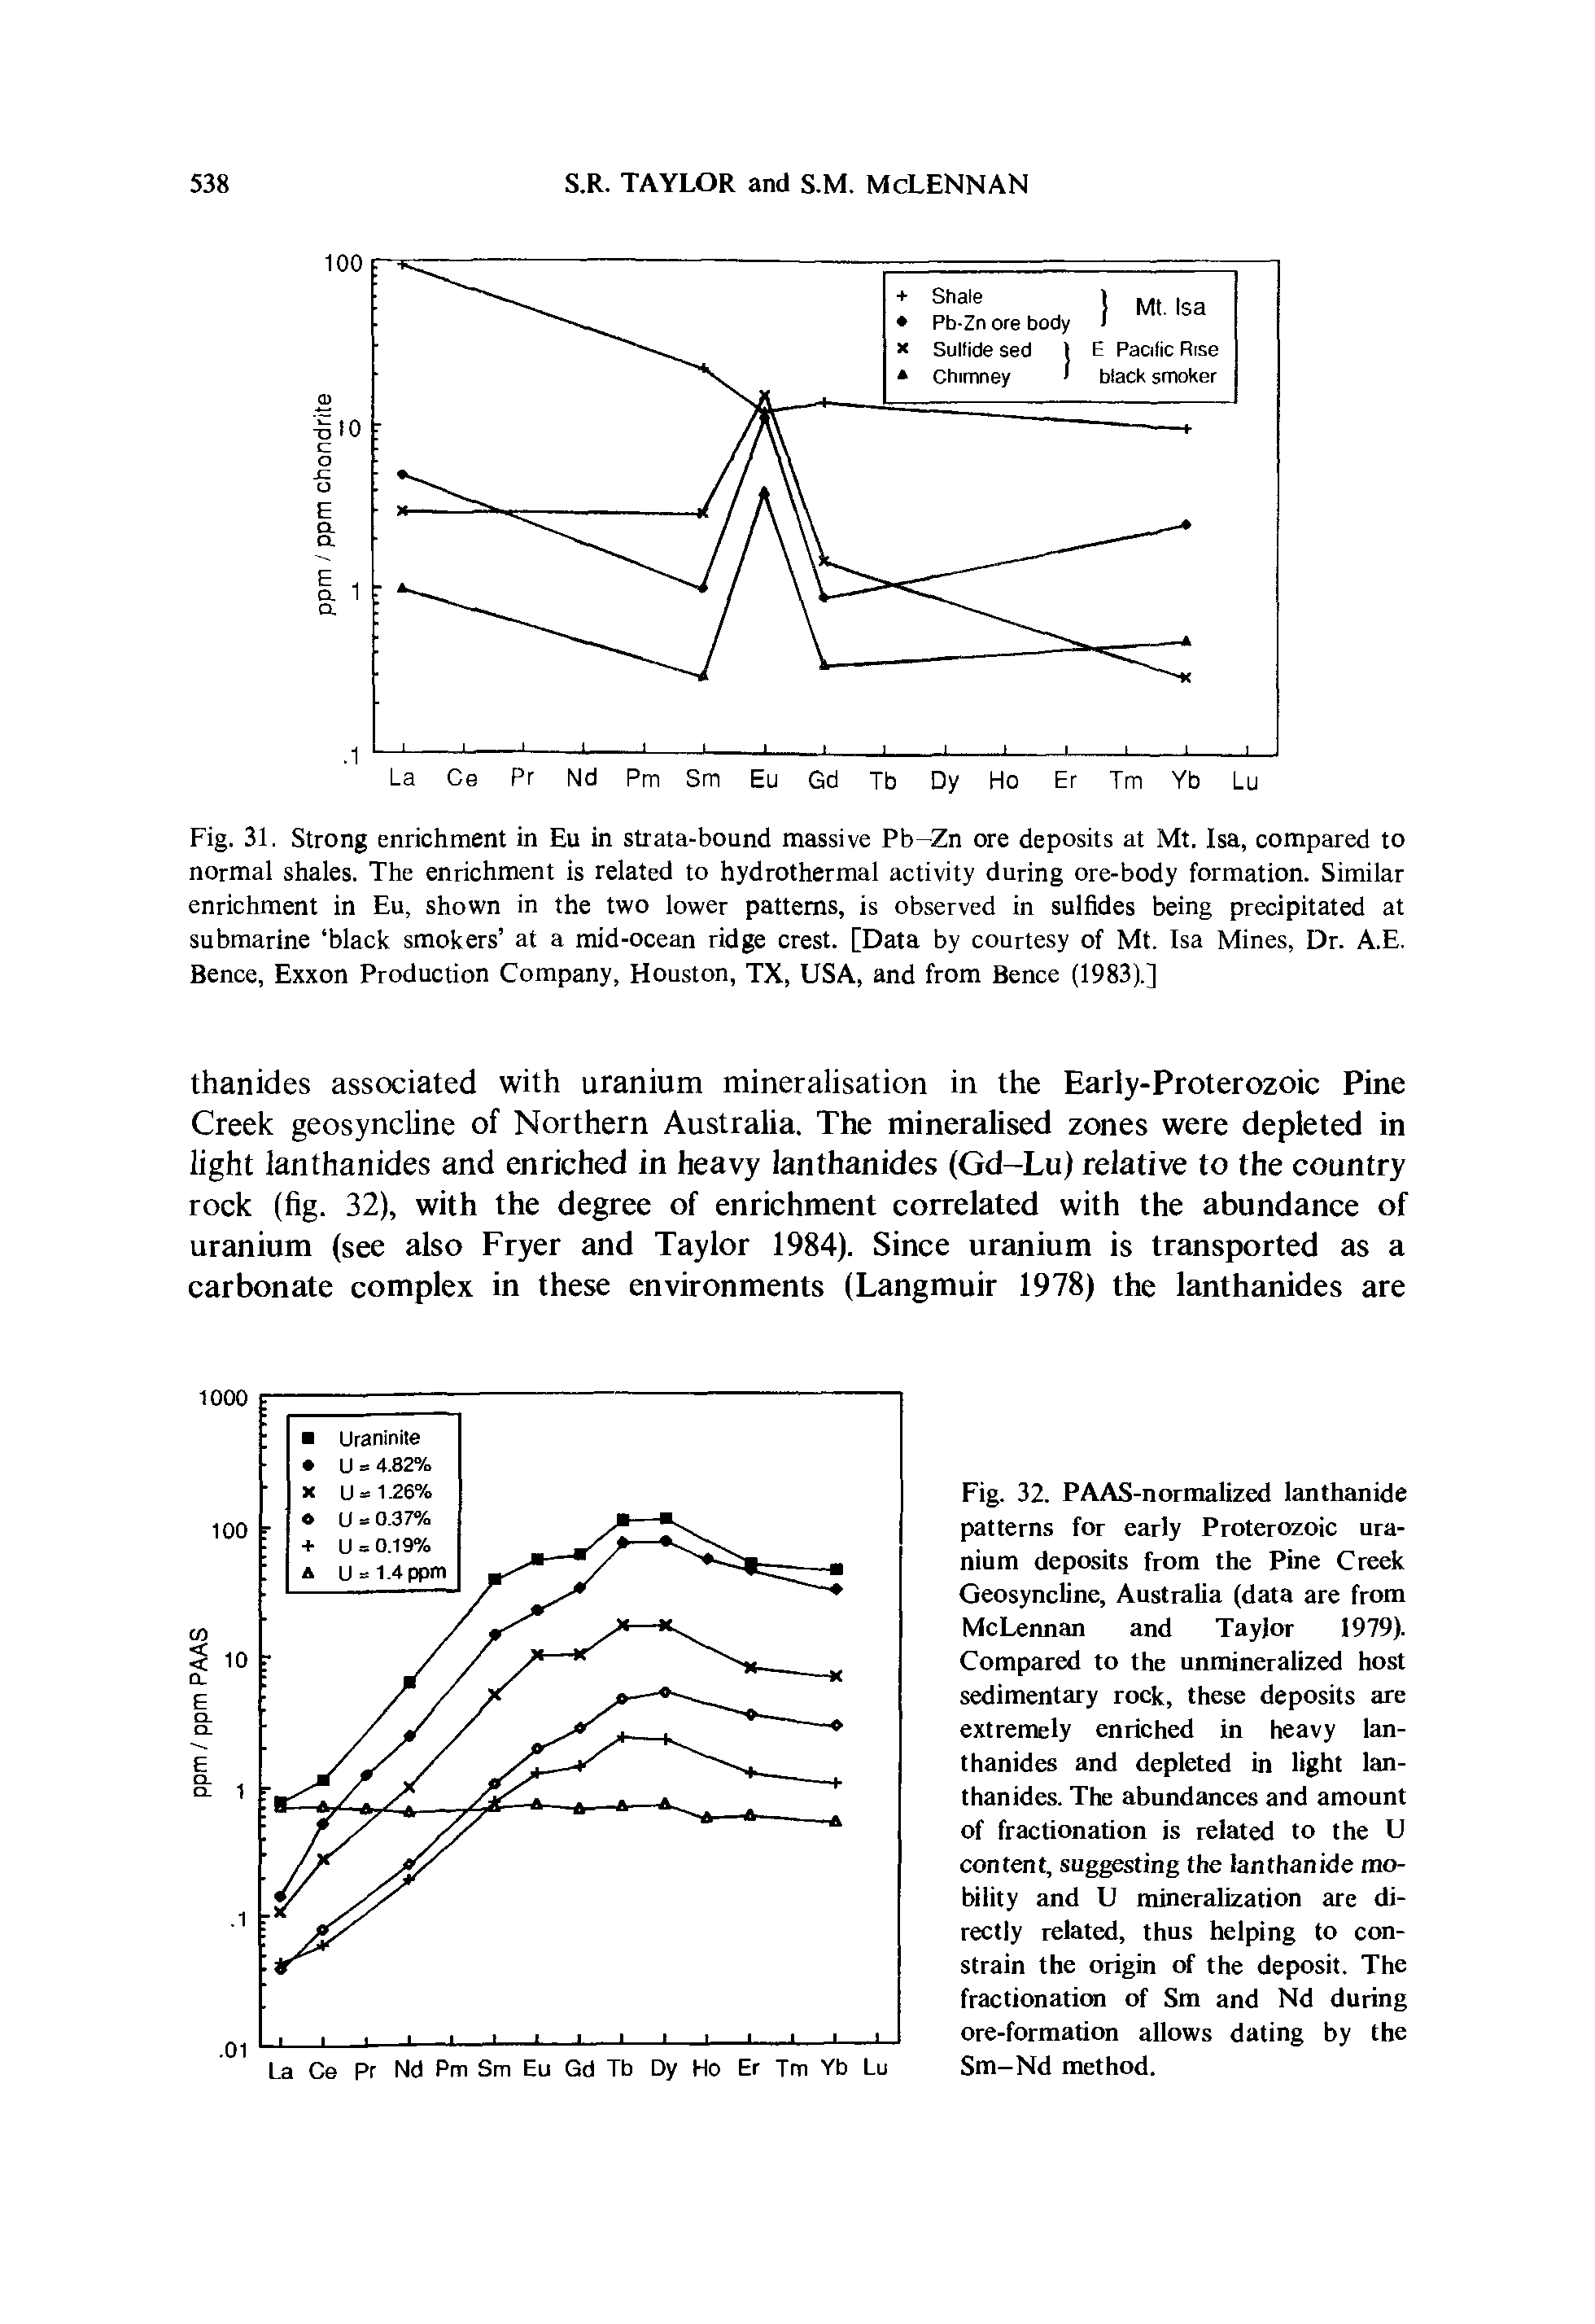 Fig. 31. Strong enrichment in Eu in strata-bound massive Pb-Zn ore deposits at Mt. Isa, compared to normal shales. The enrichment is related to hydrothermal activity during ore-body formation. Similar enrichment in Eu, shown in the two lower patterns, is observed in sulfides being precipitated at submarine black smokers at a mid-ocean ridge crest. [Data by courtesy of Mt. Isa Mines, Dr. A.E. Bence, Exxon Production Company, Houston, TX, USA, and from Bence (1983).]...